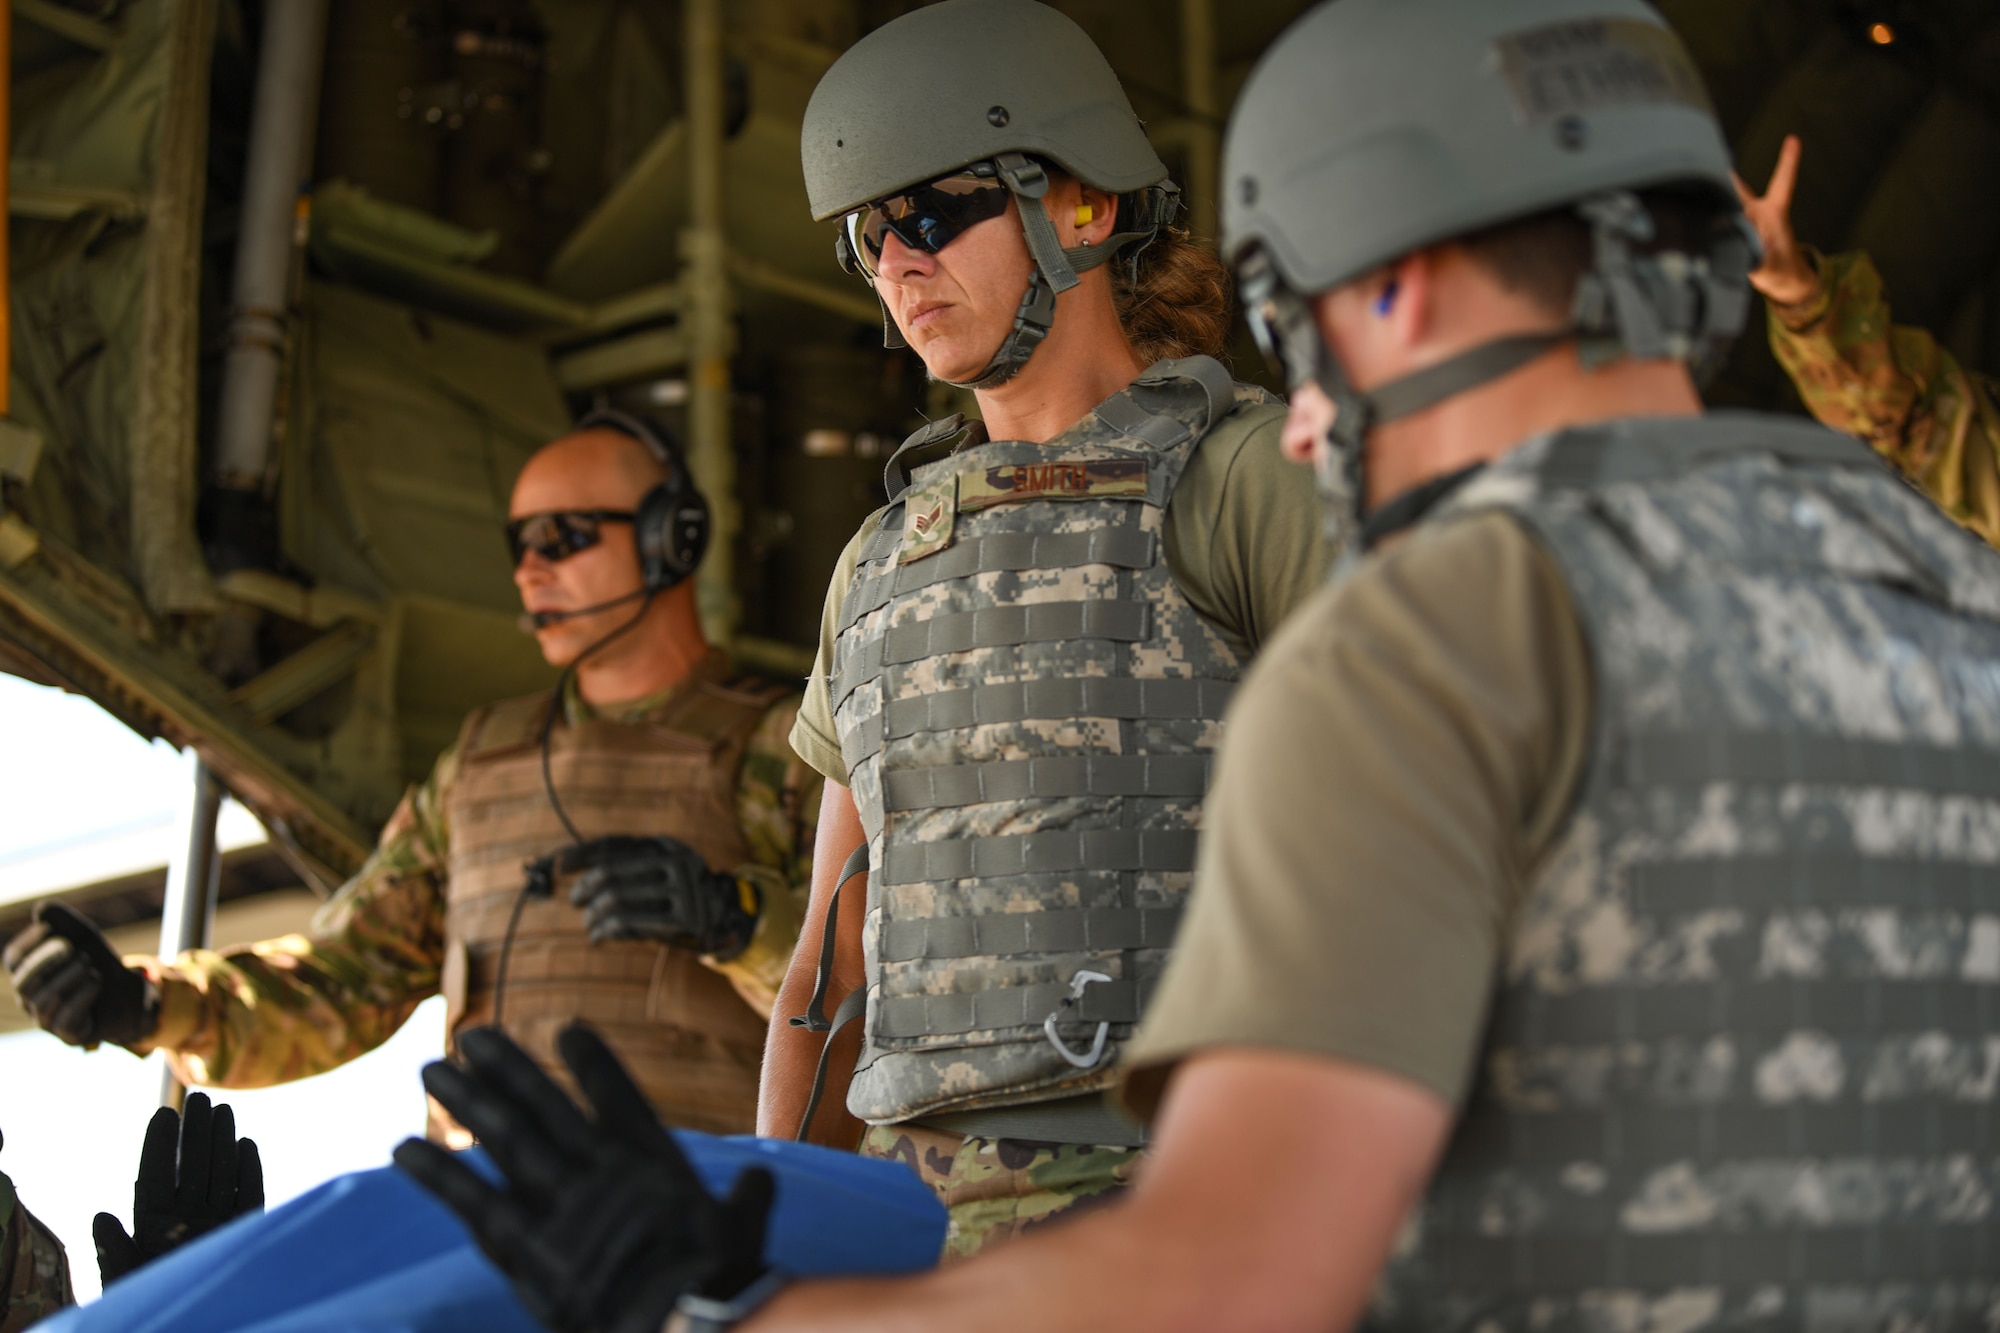 Capt. Matthew Allen, 36th Aeromedical Evacuation Squadron flight nurse (far left) is assigned to the 403rd Wing, Keesler Air Force Base, Mississippi. He works with other AE Airmen to offload a C-130J Super Hercules aircraft assigned to fellow Keesler AFB unit, the 815th Airlift Squadron, for aeromedical evacuation training during the exercise Patriot Warrior at Fort McCoy, Wisconsin, Aug. 15, 2021. Patriot Warrior is Air Force Reserve Command's premier exercise providing Airmen an opportunity to train with joint and international partners in airlift, aeromedical evacuation, and mobility support. The exercise builds on capabilities for the future fight, increasing the readiness, lethality and agility of the Air Force Reserve. (U.S. Air Force Photo by Tech. Sgt. Corban Lundborg)